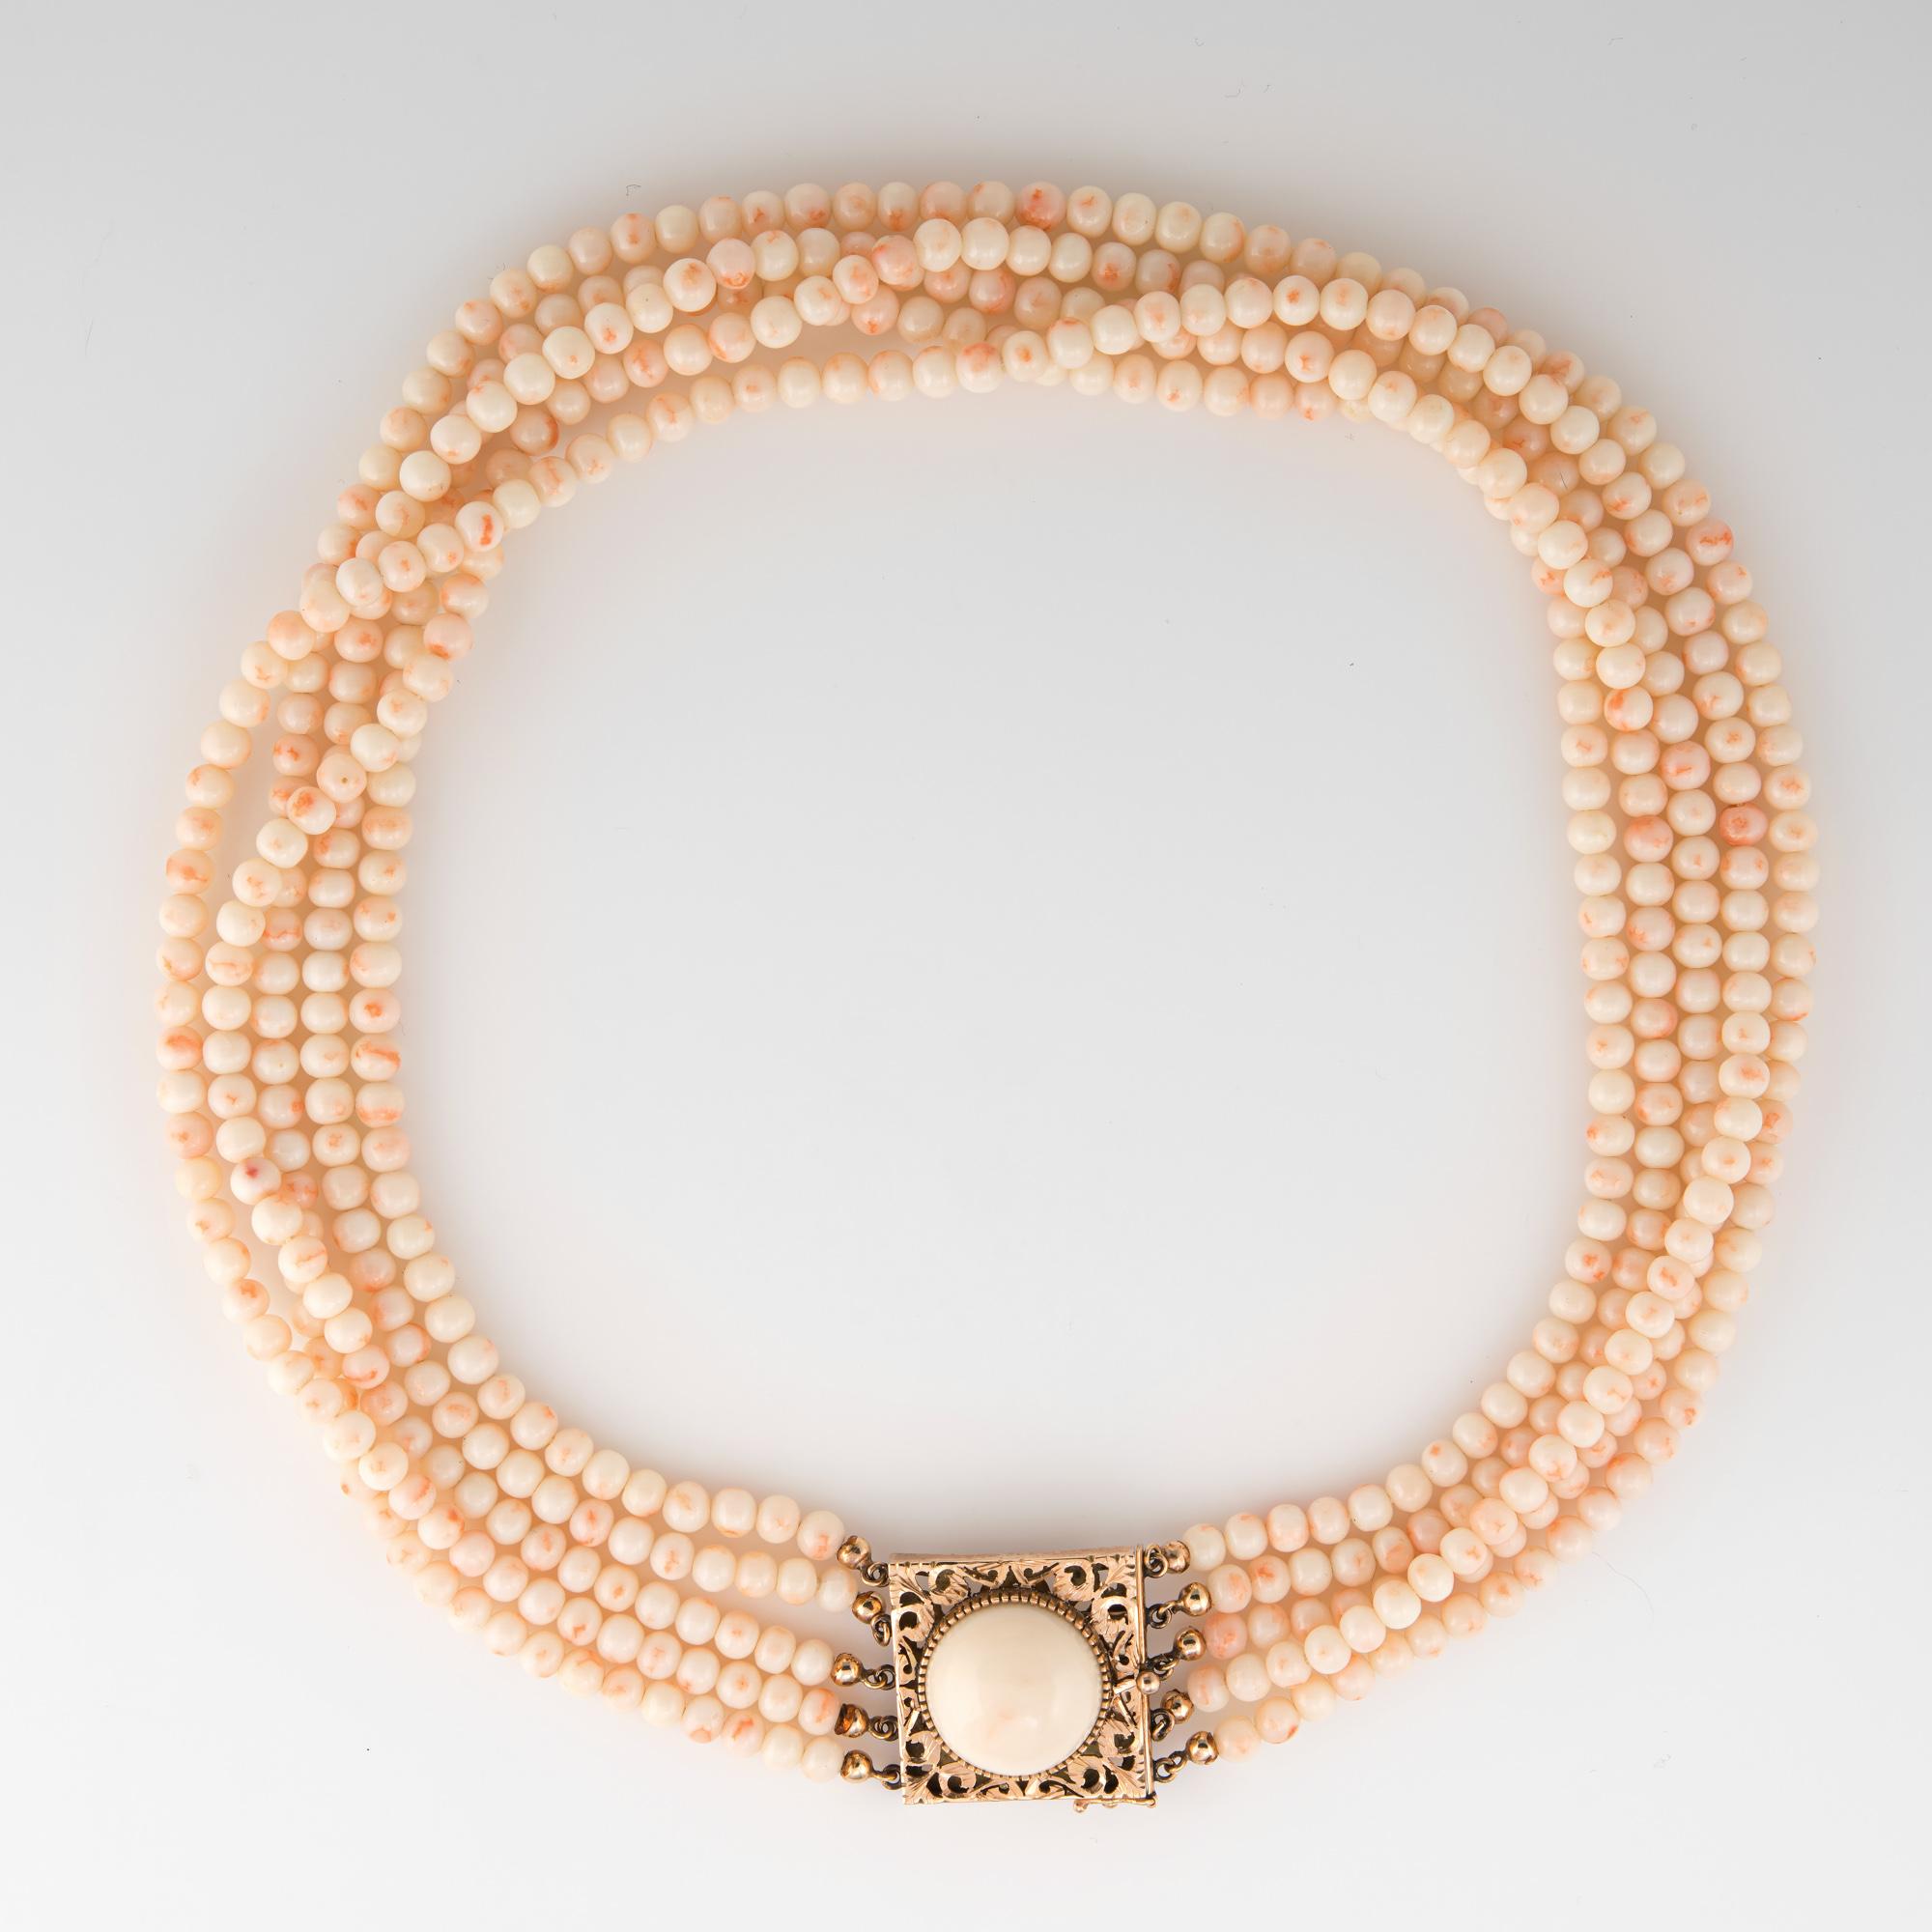 Finely detailed vintage angel skin coral necklace finished with a 14 karat yellow gold clasp (circa 1950s to 1960s). 

5 strands of angel skin coral beads are uniform in size measuring 4.5mm each. The clasp is set with a 16.2mm piece of angel skin